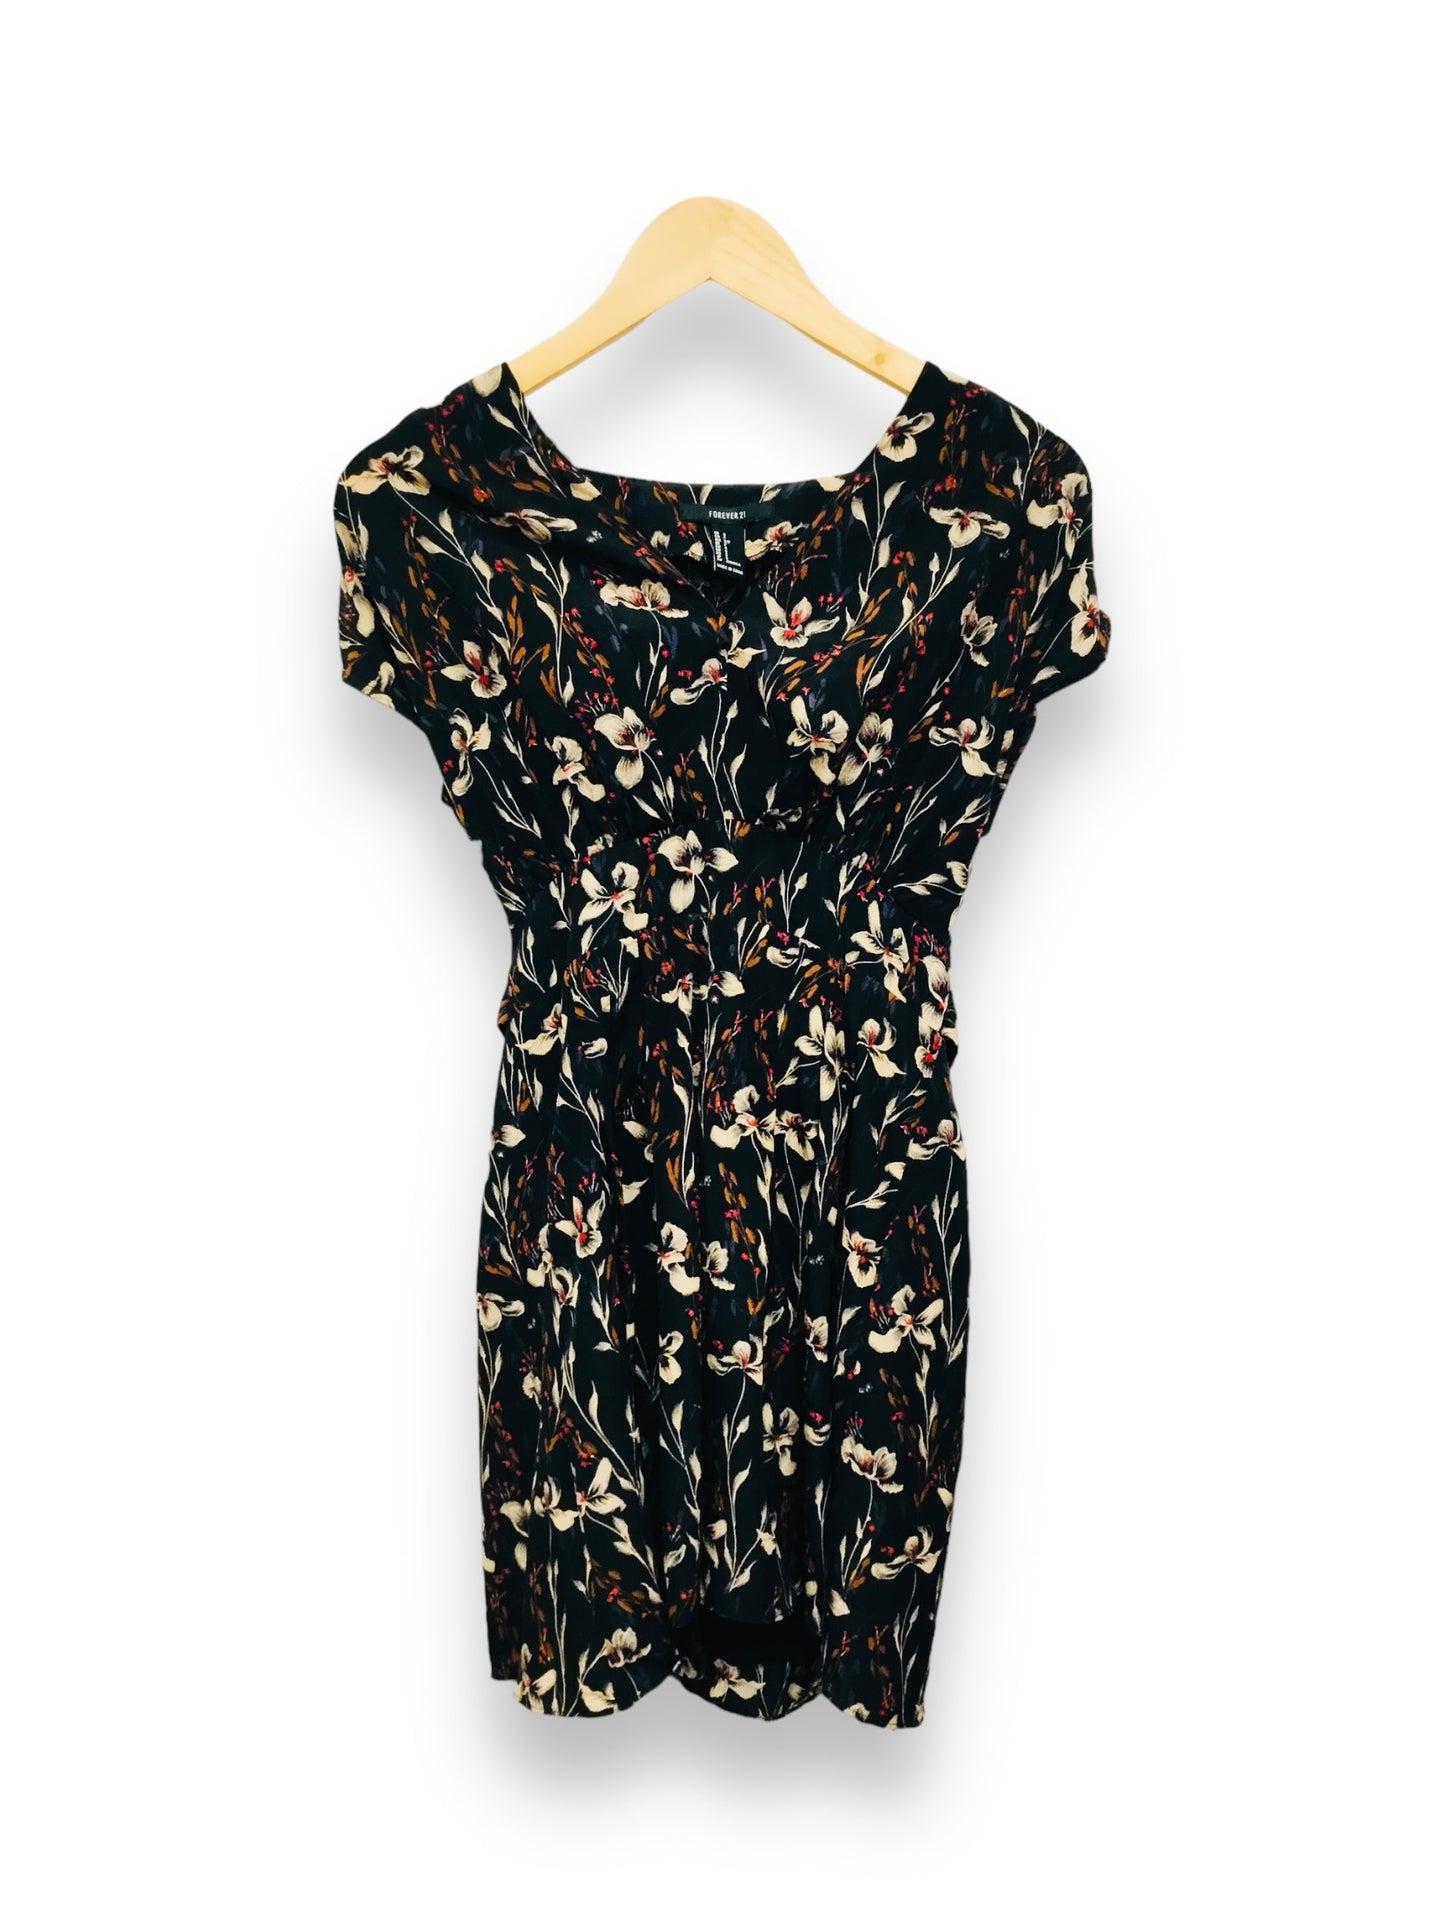 Floral Print Dress Casual Midi Forever 21, Size S